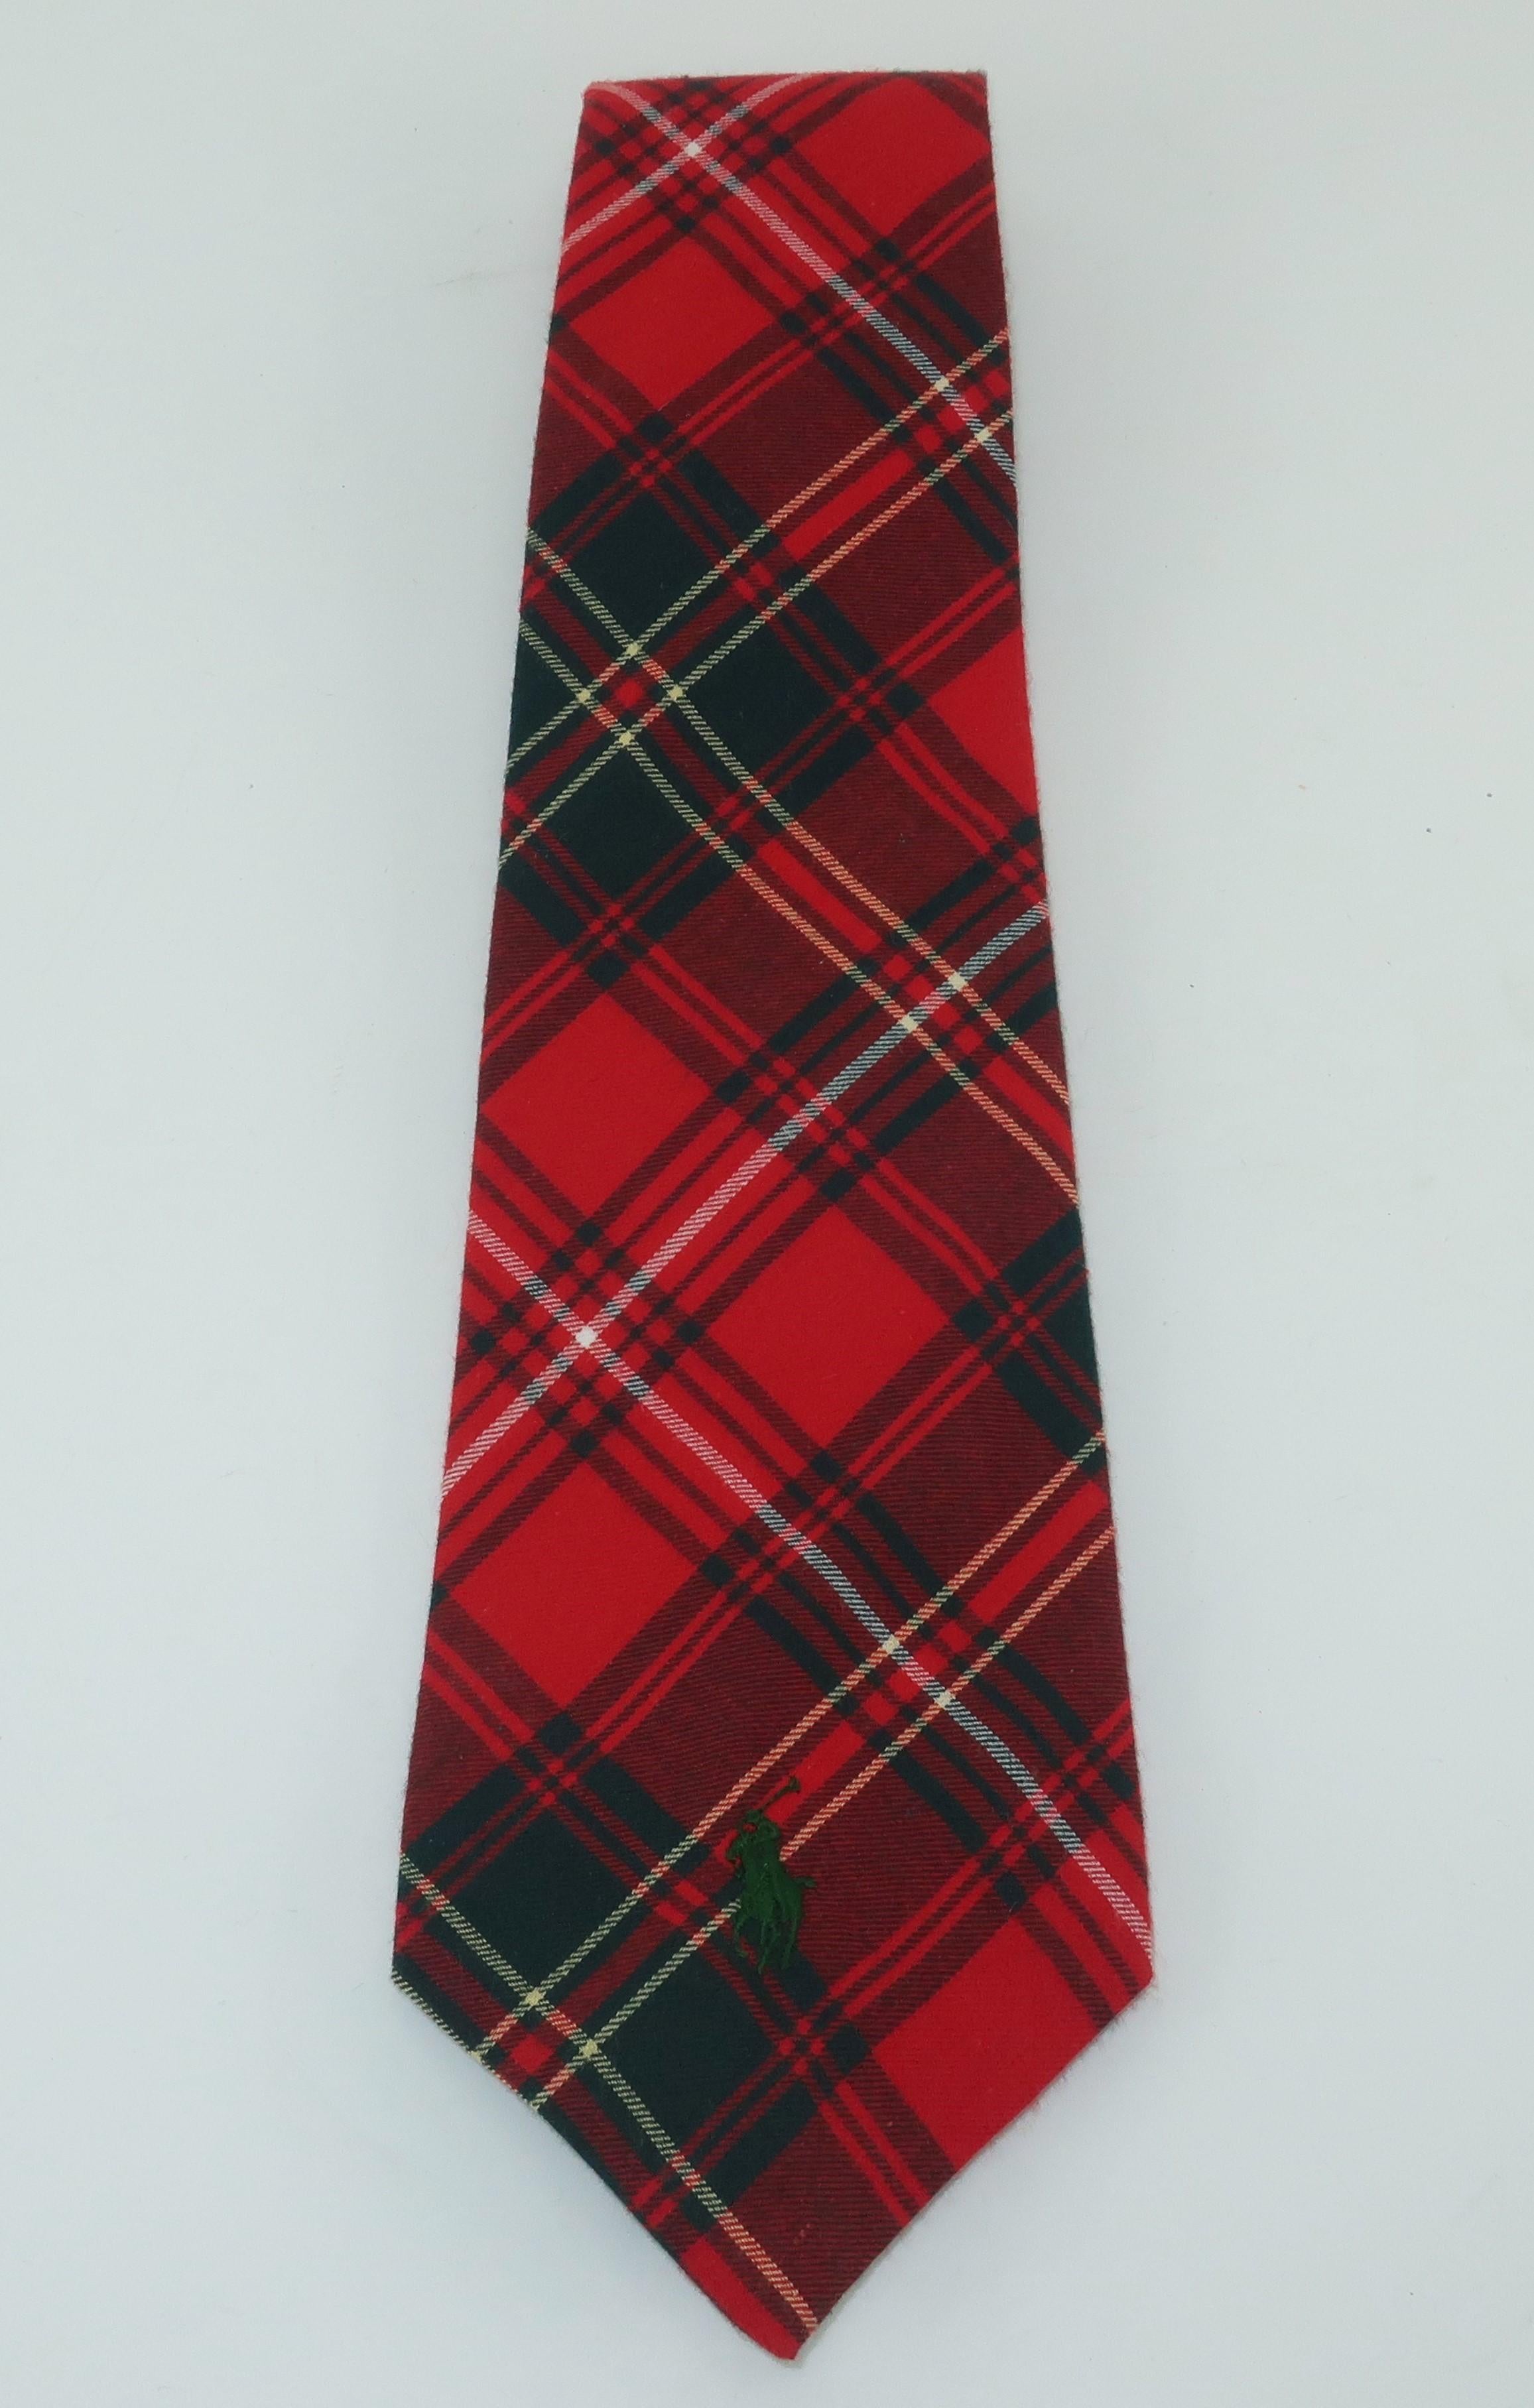 Ralph Lauren creates all-American good looks and a nod to a Scottish past with this tartan plaid men's cotton flannel necktie.  The classic plaid combines shades of red and dark green with just a touch of white with yellow perfect for creating a